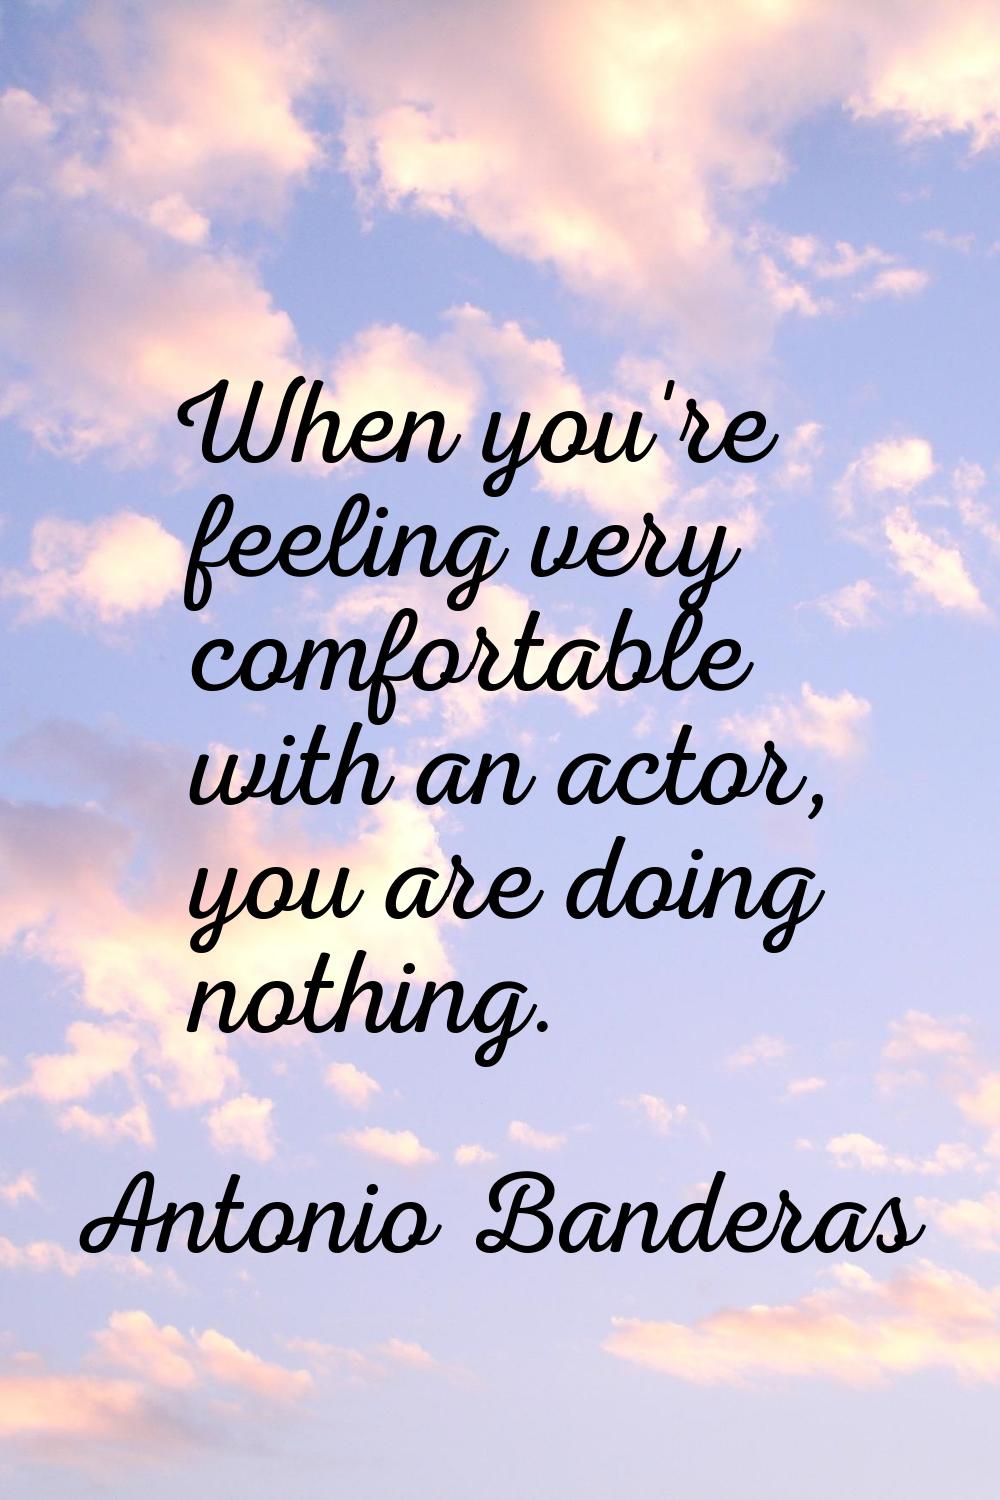 When you're feeling very comfortable with an actor, you are doing nothing.